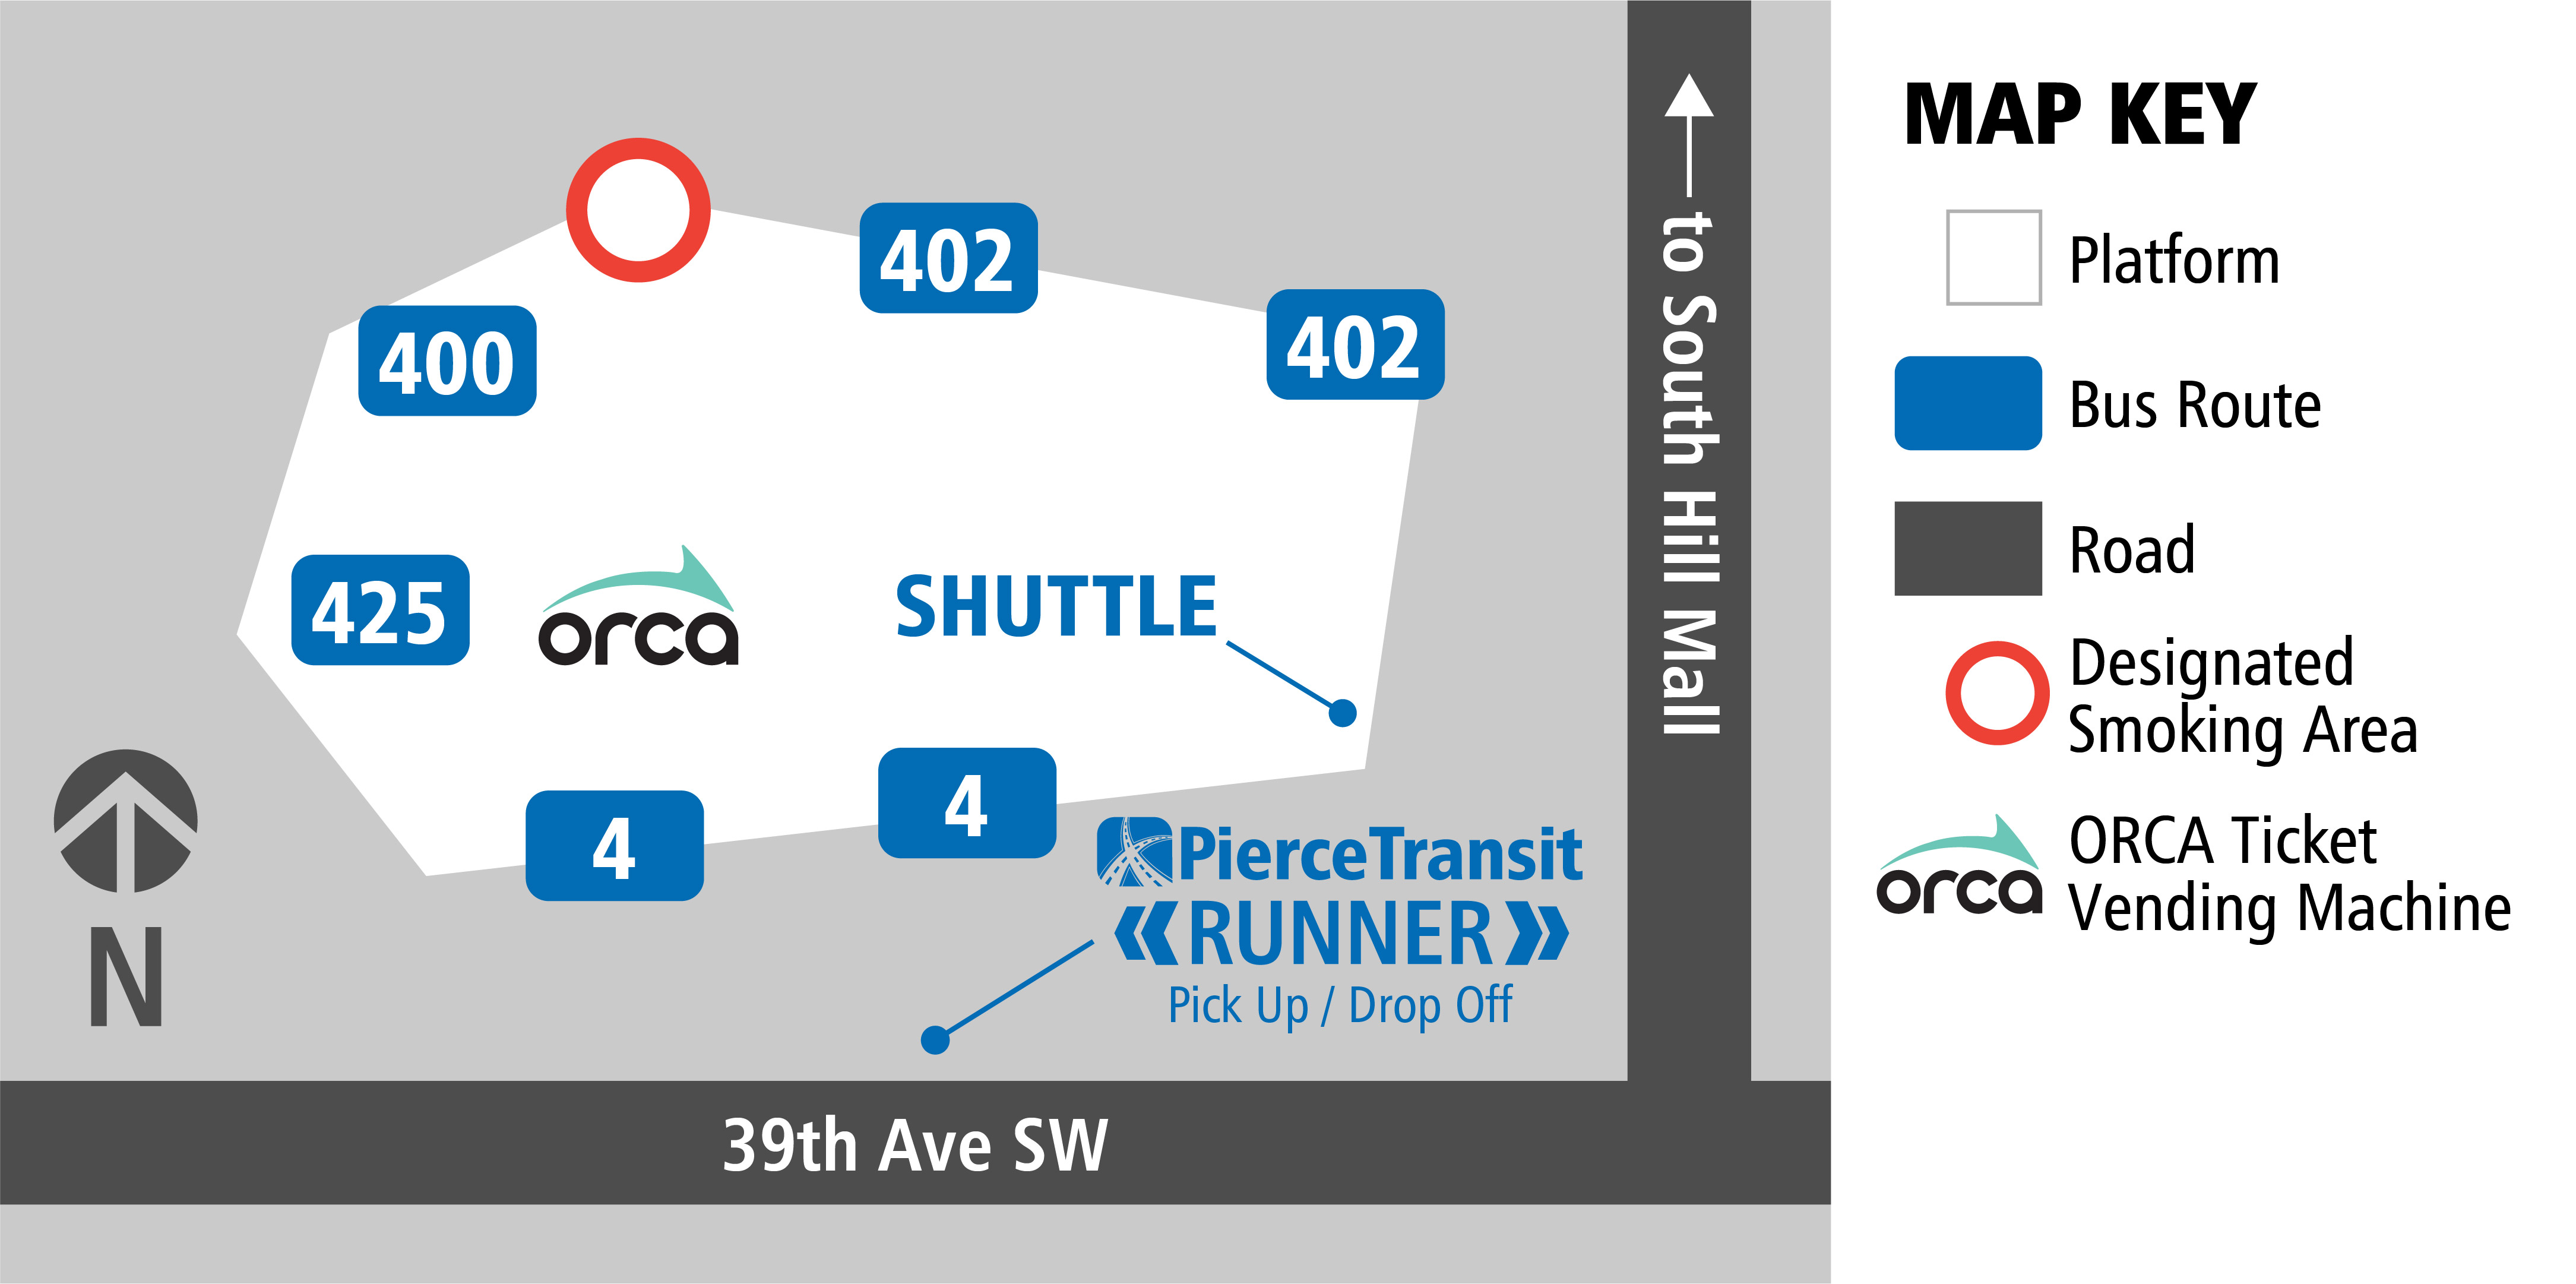 South Hill Mall Transit Center map